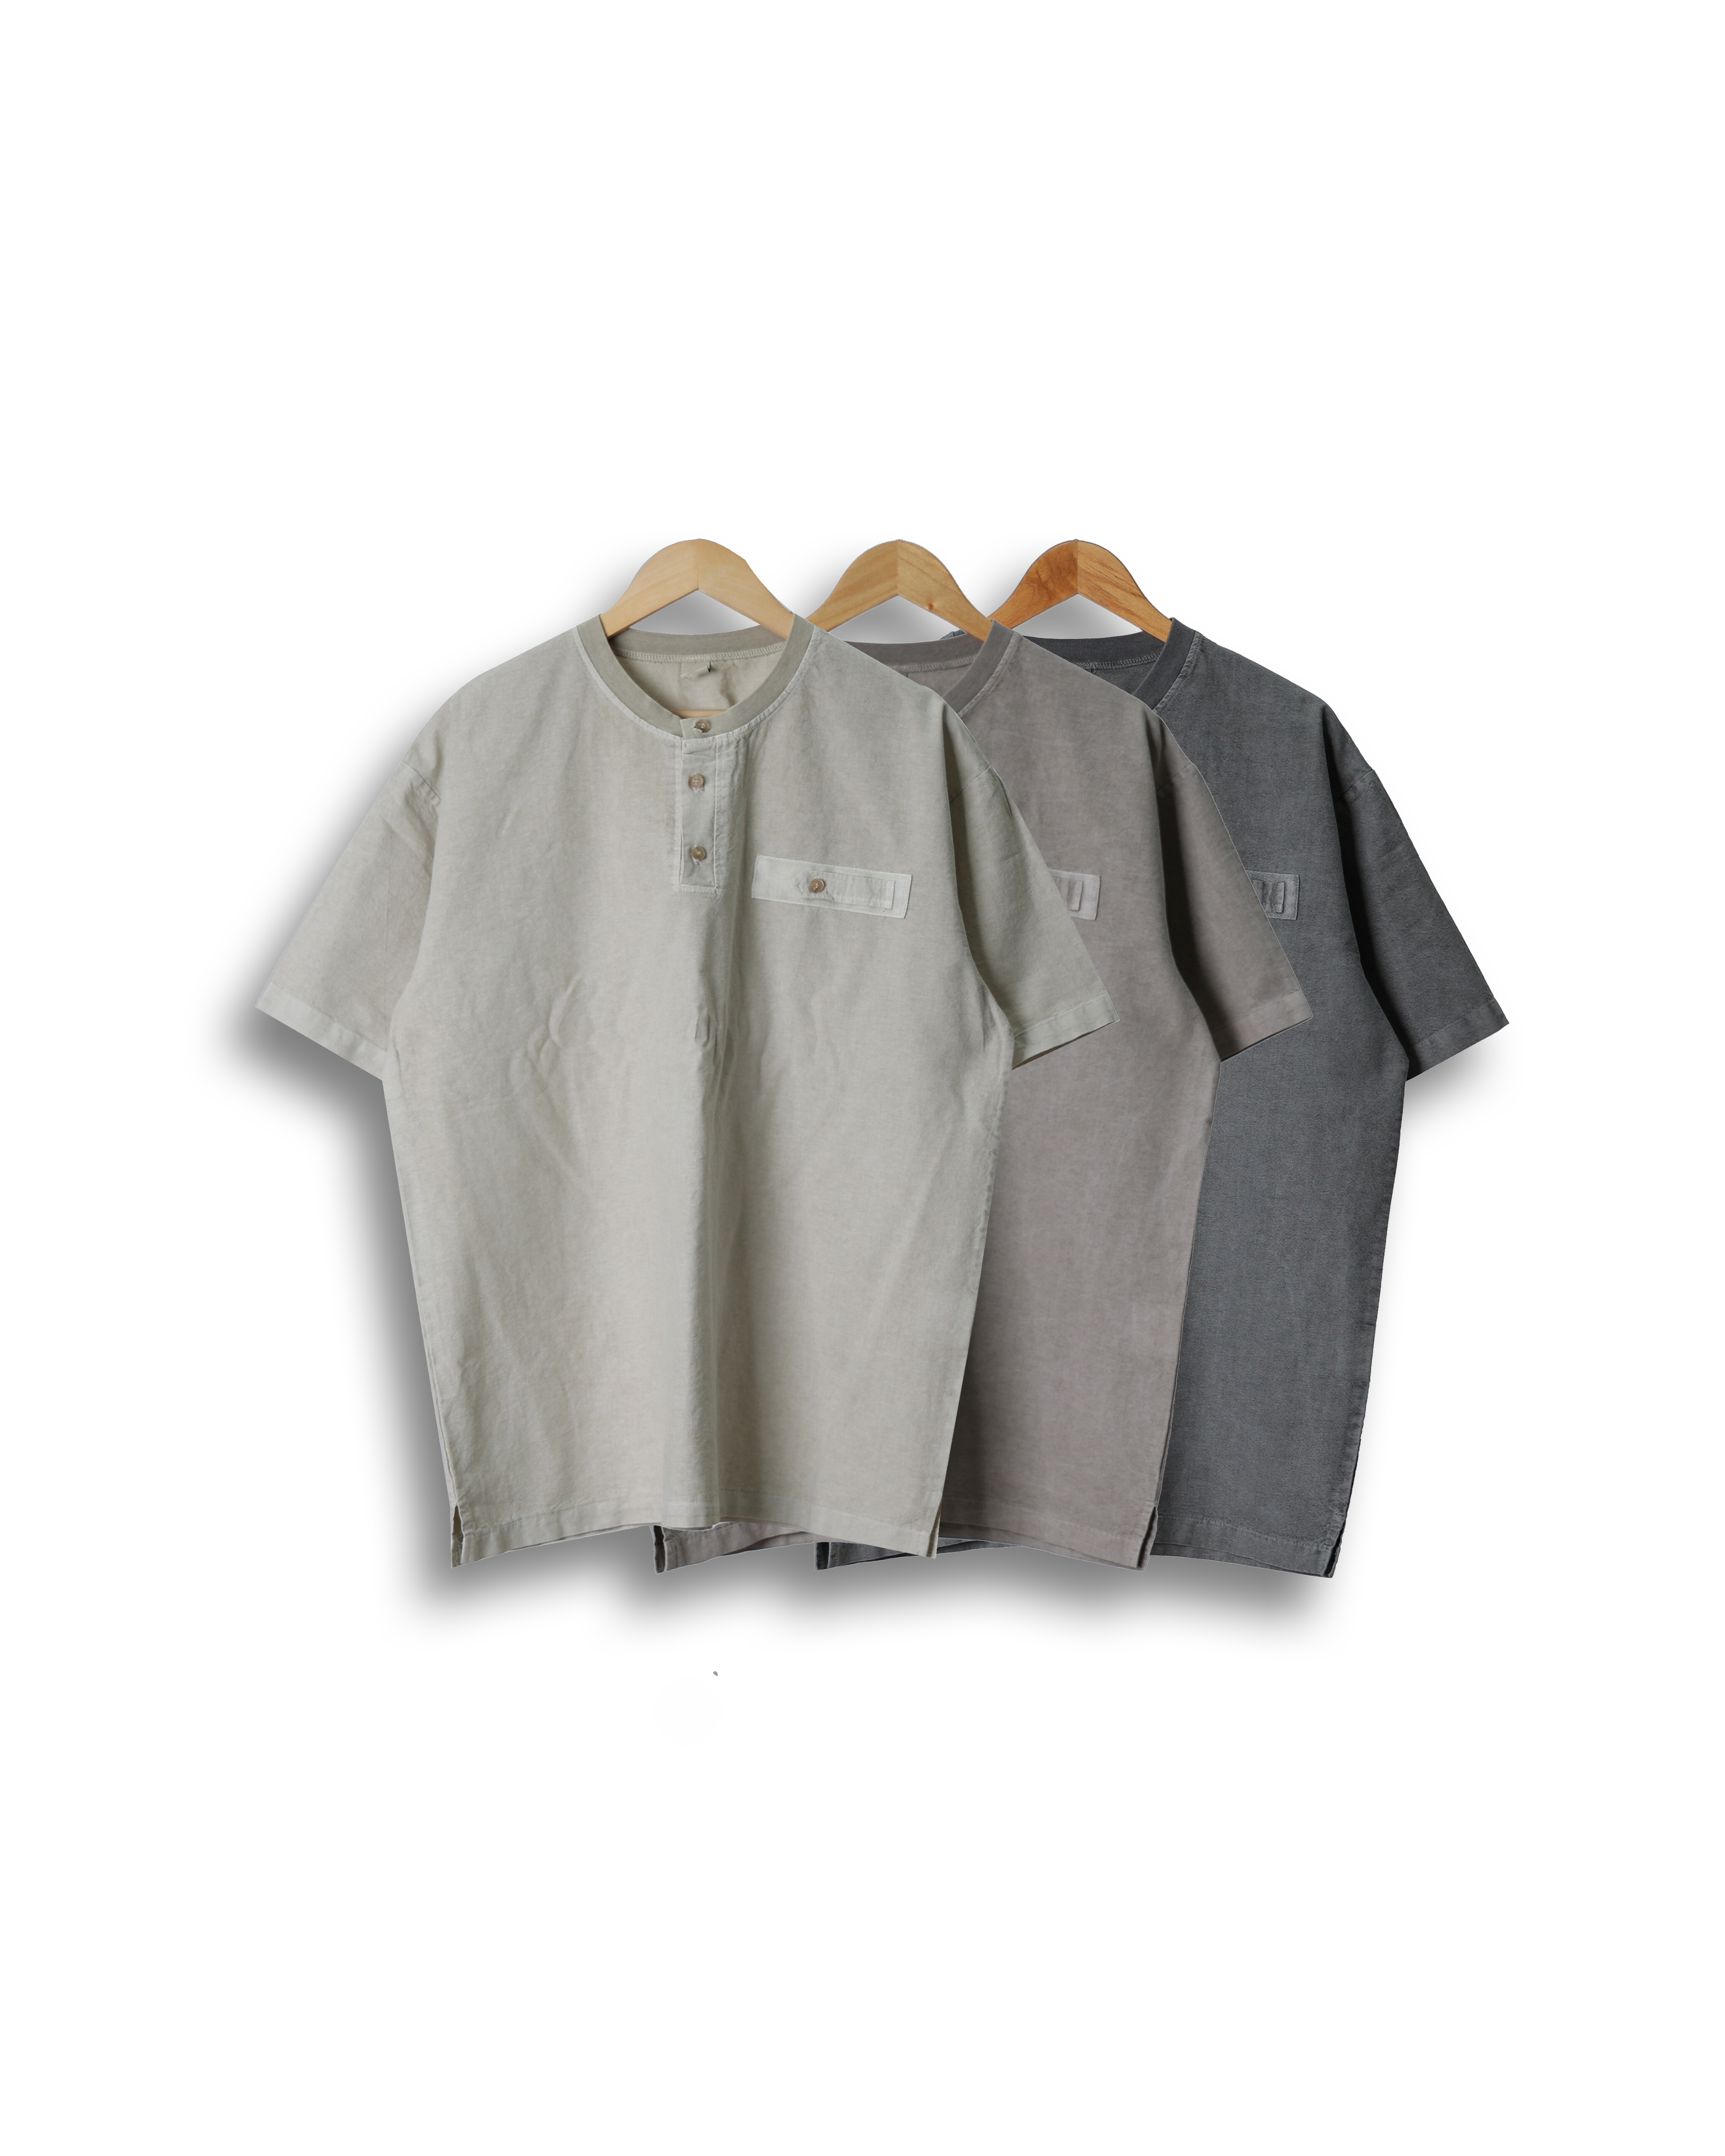 RAMS ORDINARY Washed Henley T Shirts (Charcoal/Beige/Light Beige)